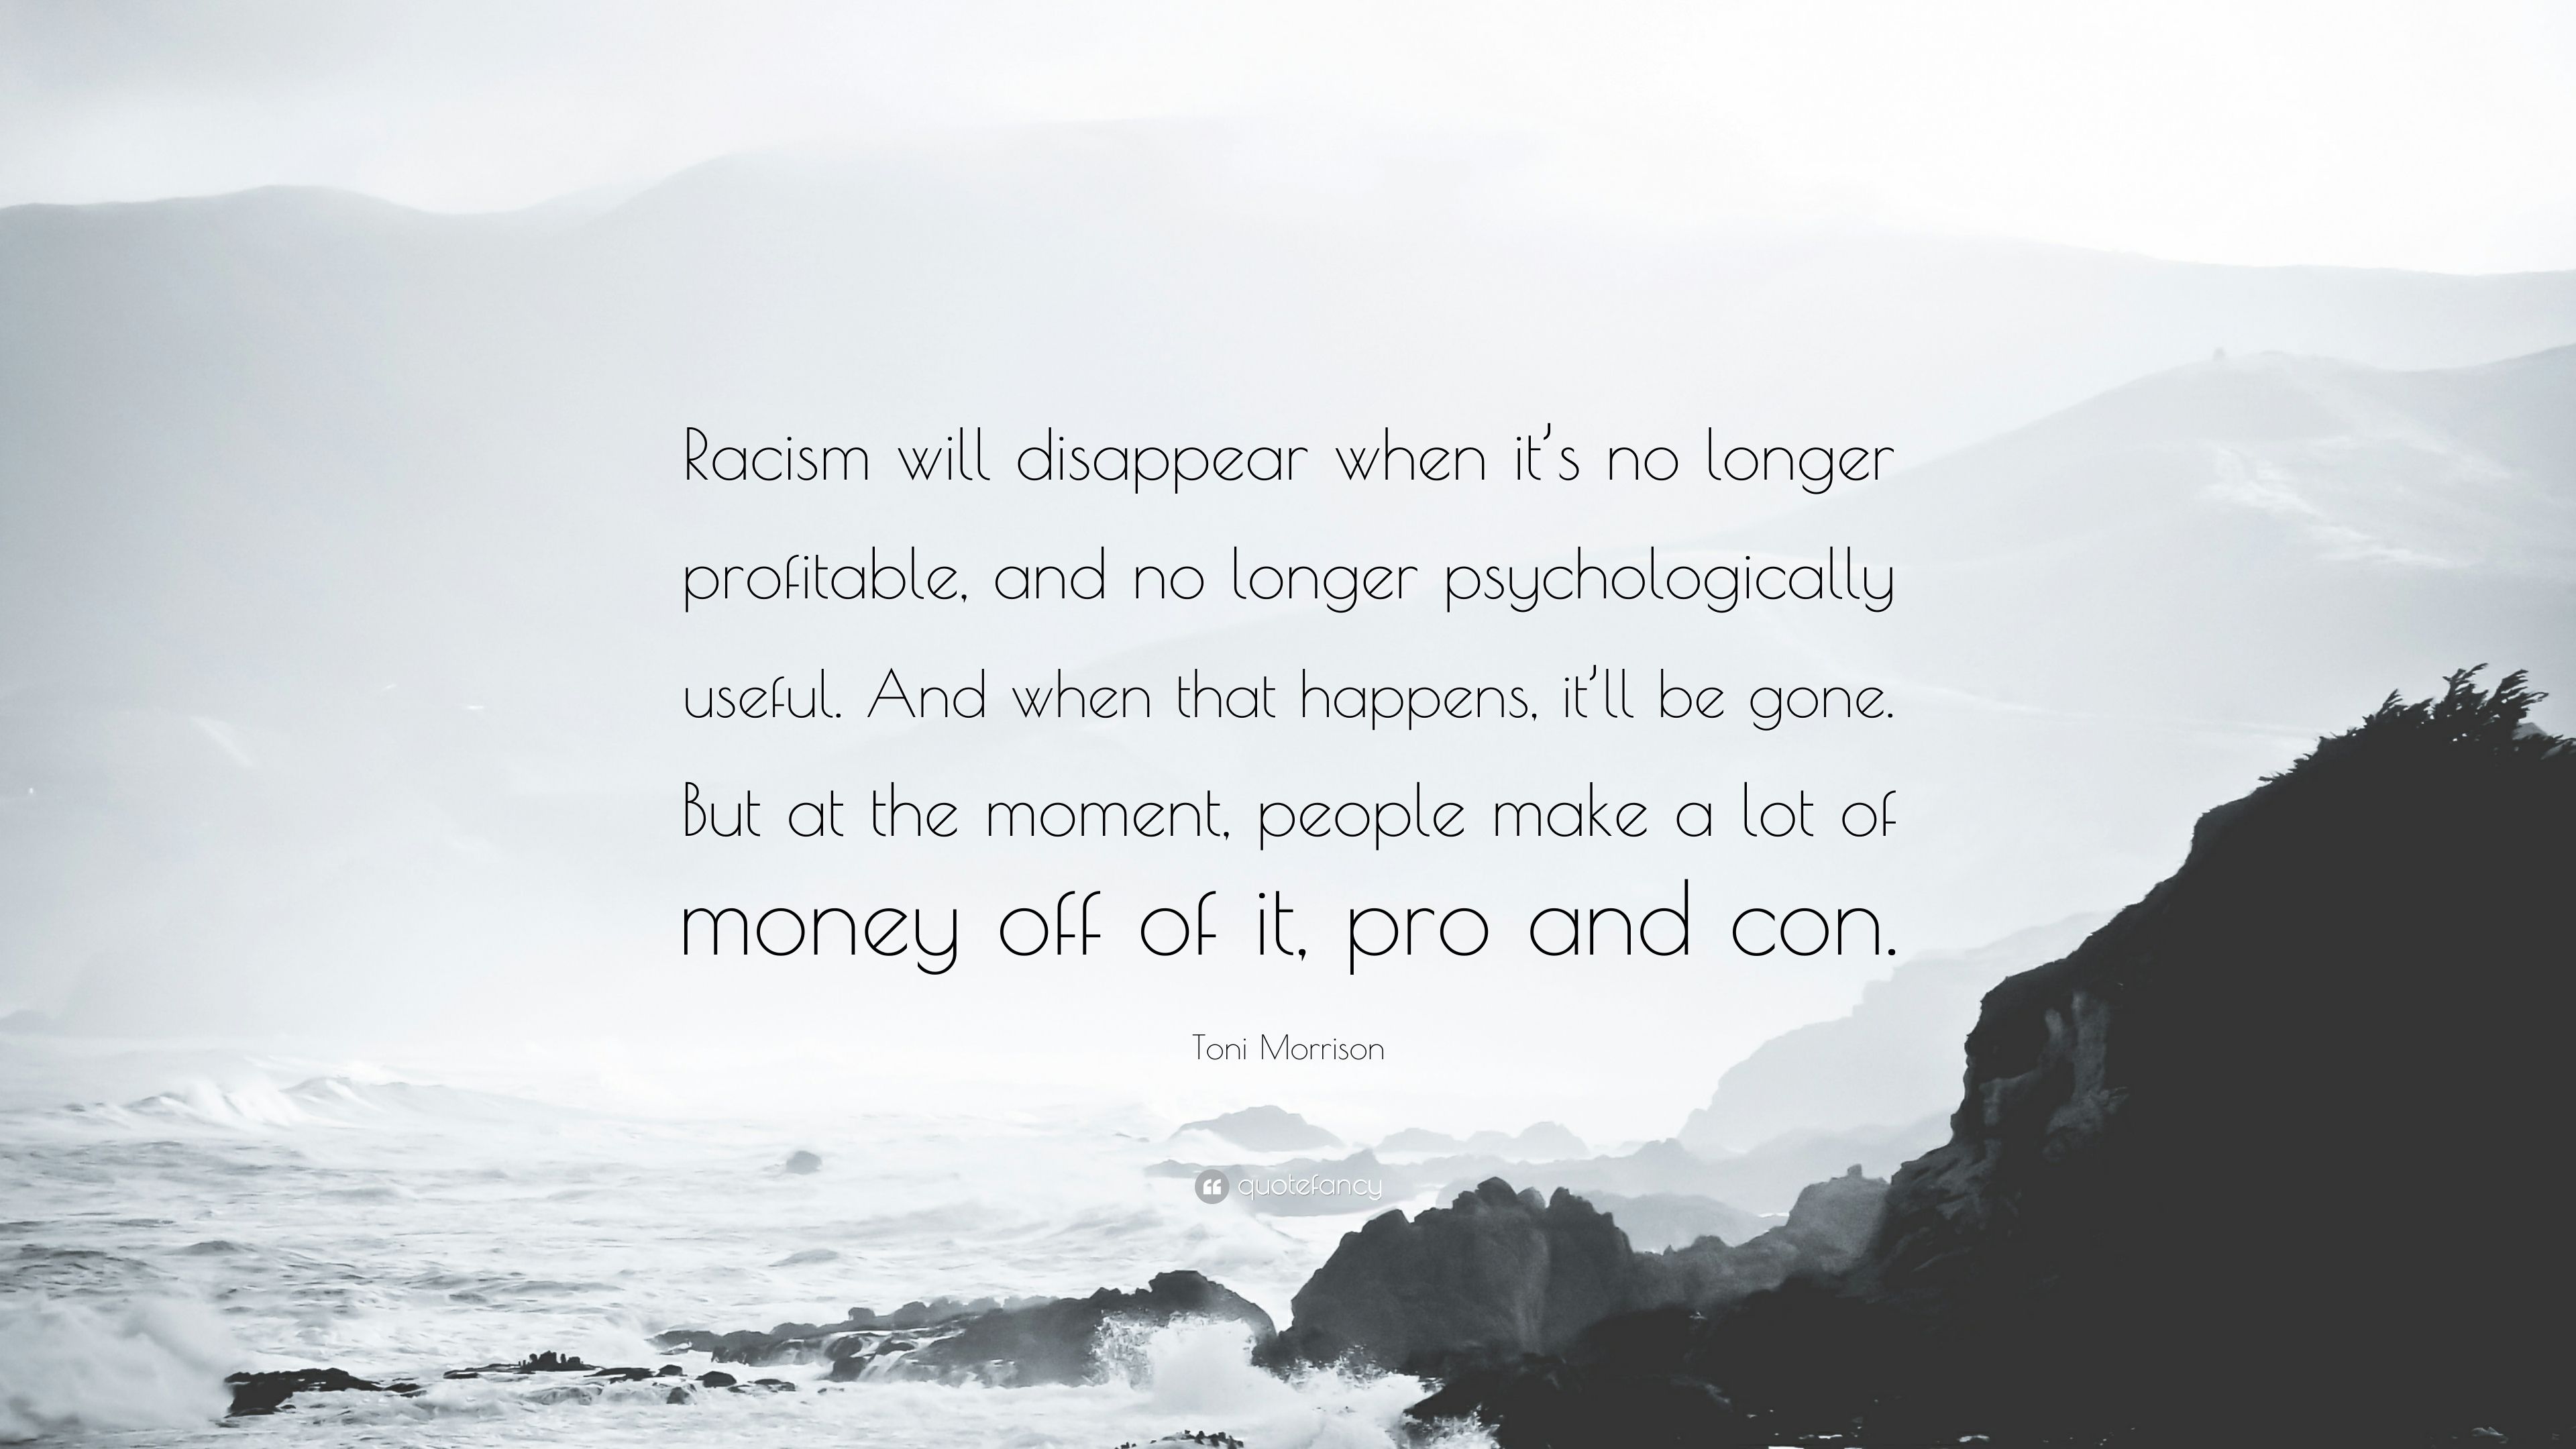 Toni Morrison Quote: “Racism will disappear when it's no longer